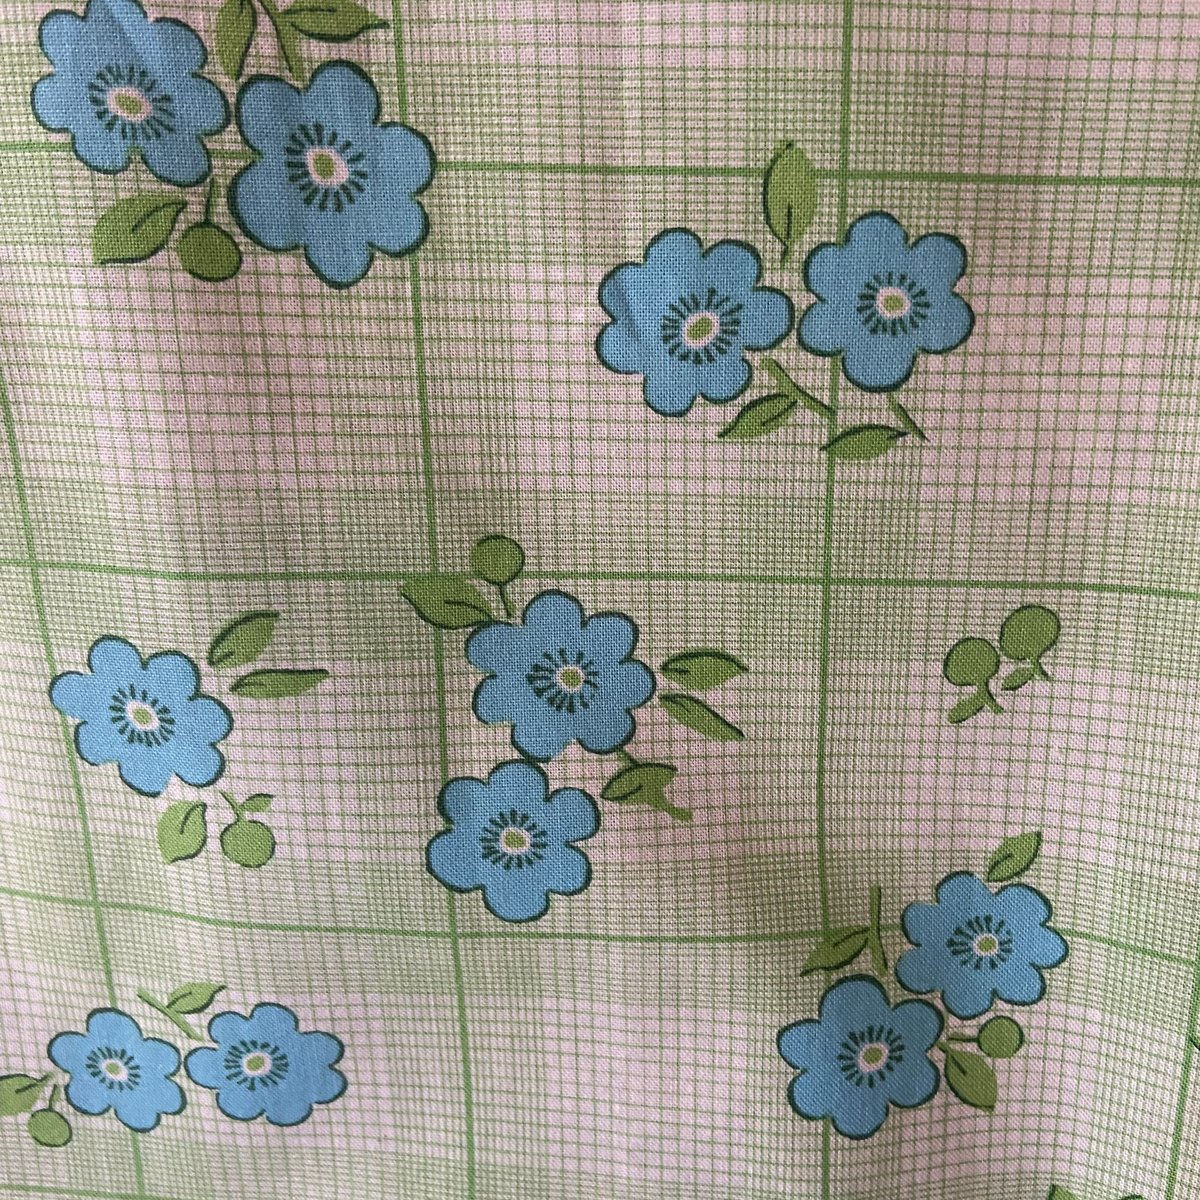 Image of Little Reversible Dress Blue Cord and Vintage Picnic